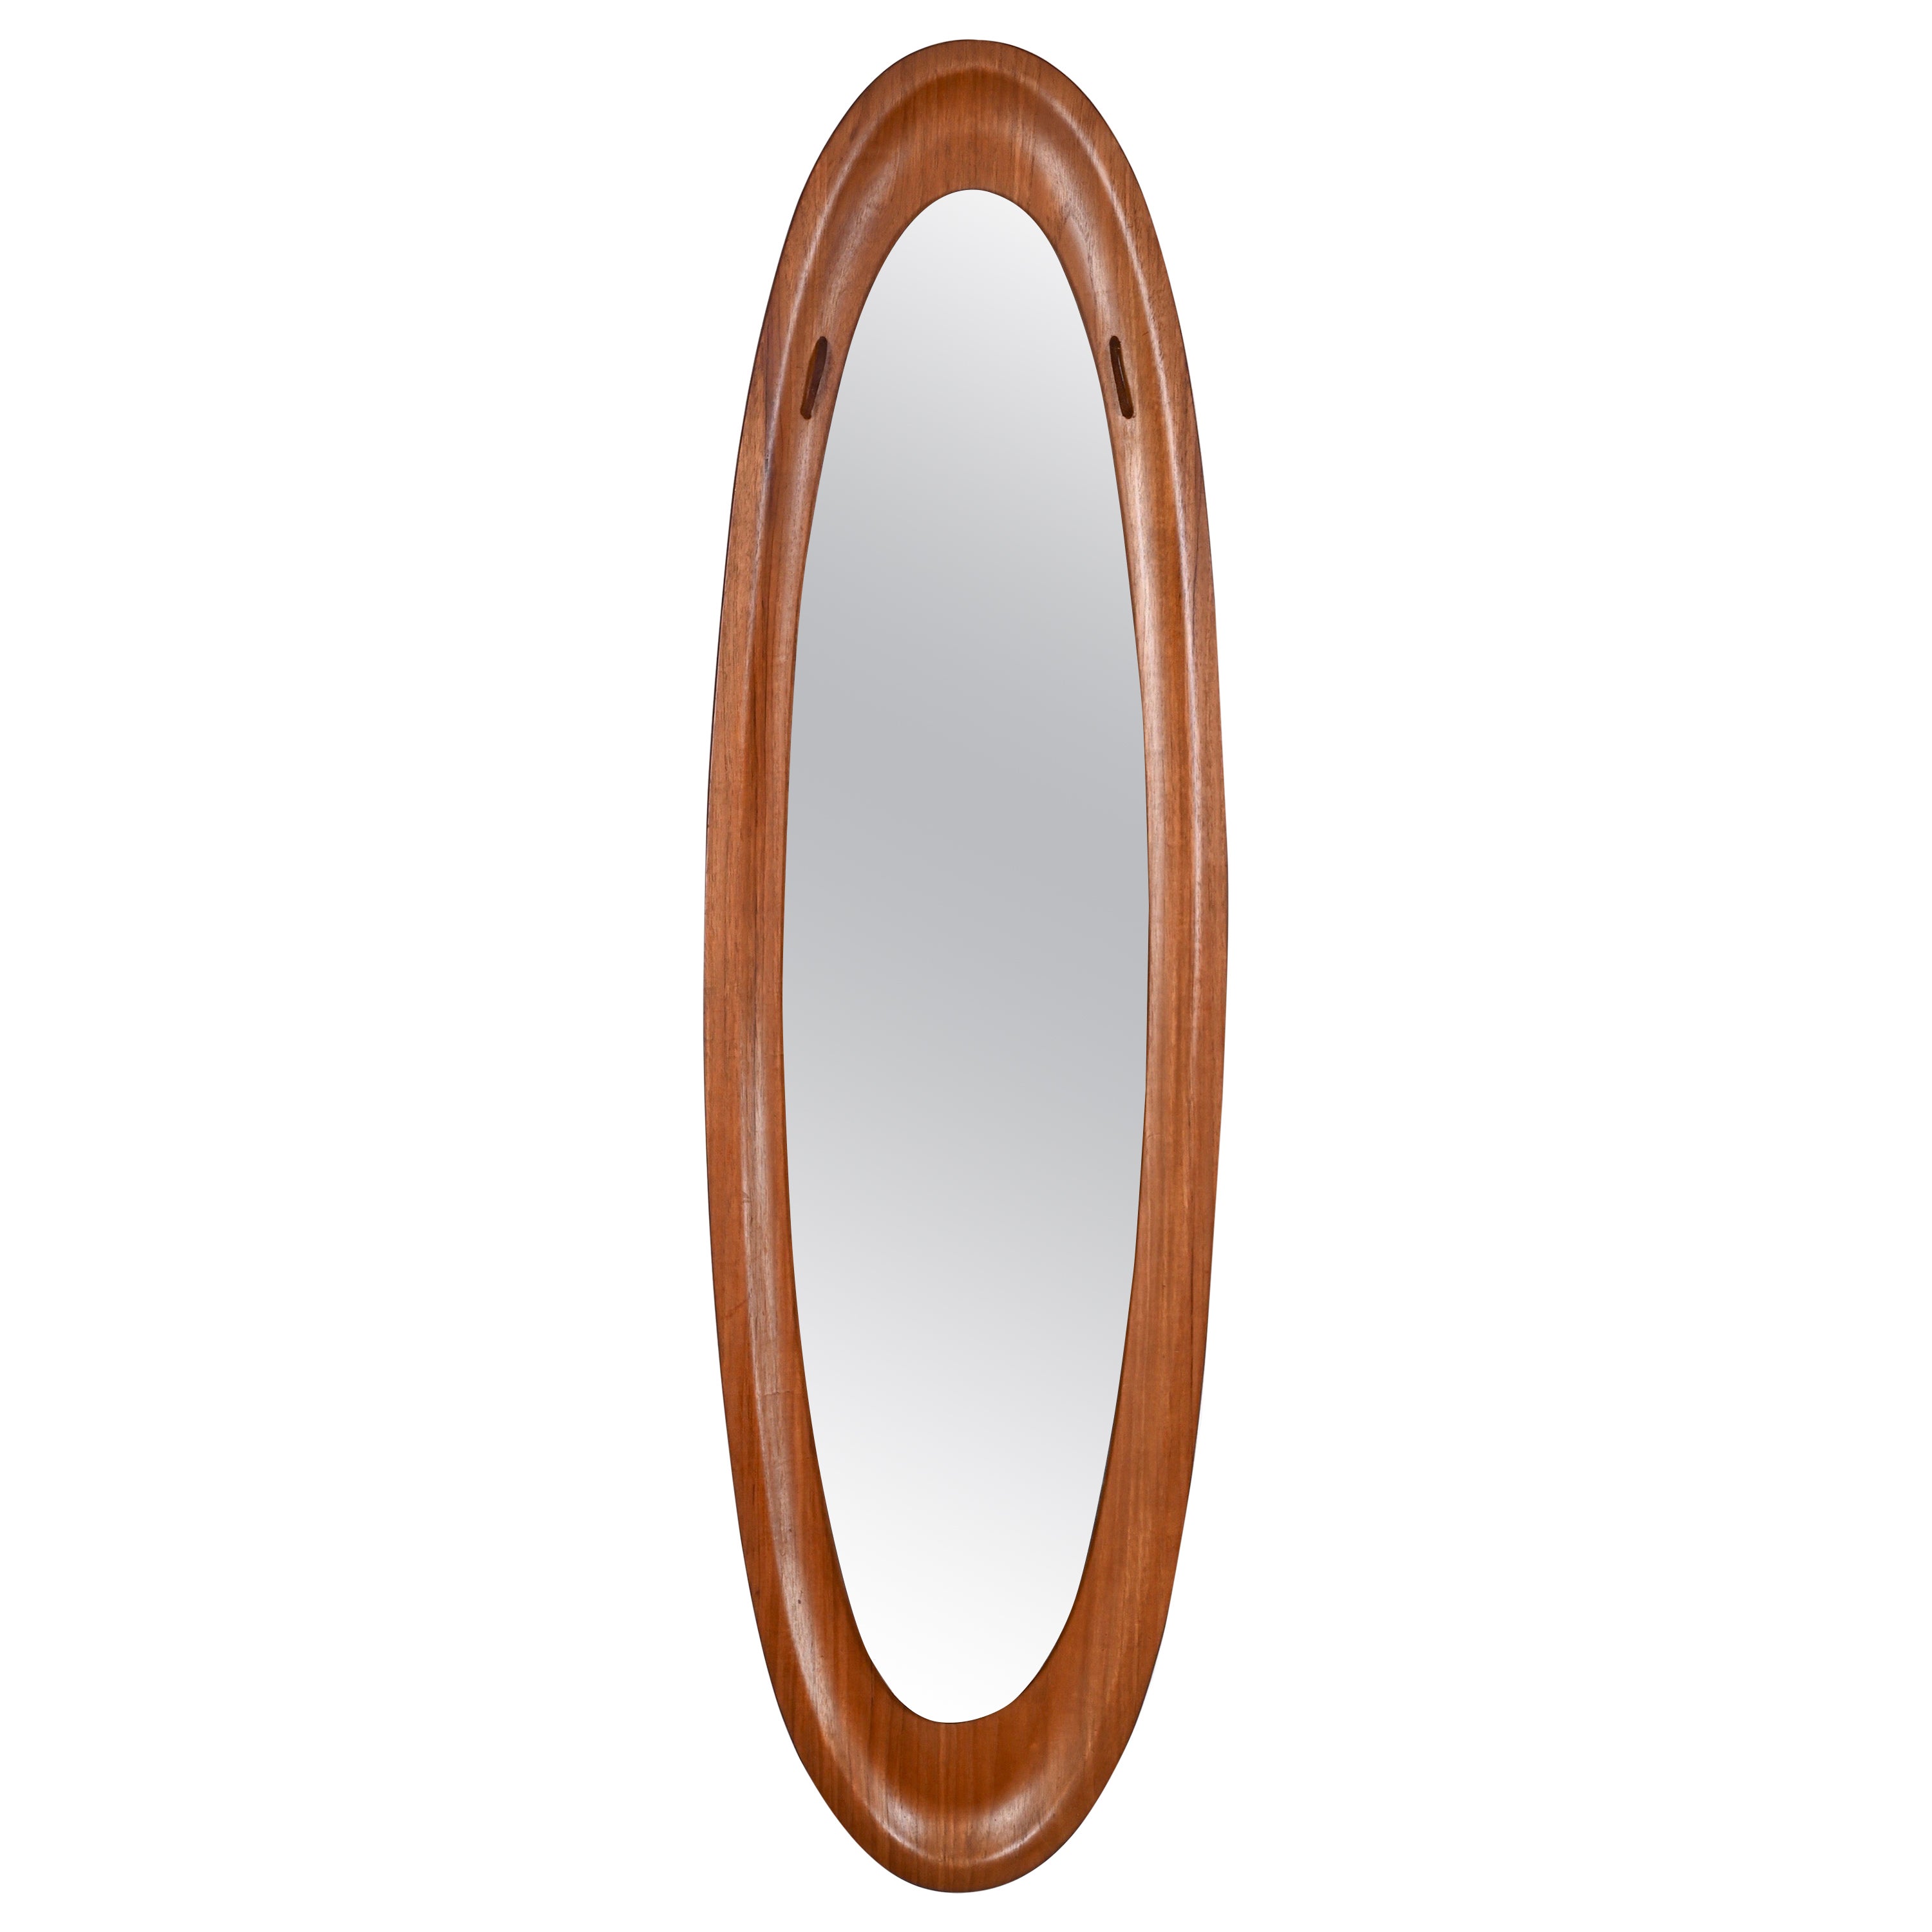 Mid-Century Campo & Graffi Curved Teak Wood Oval Wall Mirror, Italy, 1960s For Sale